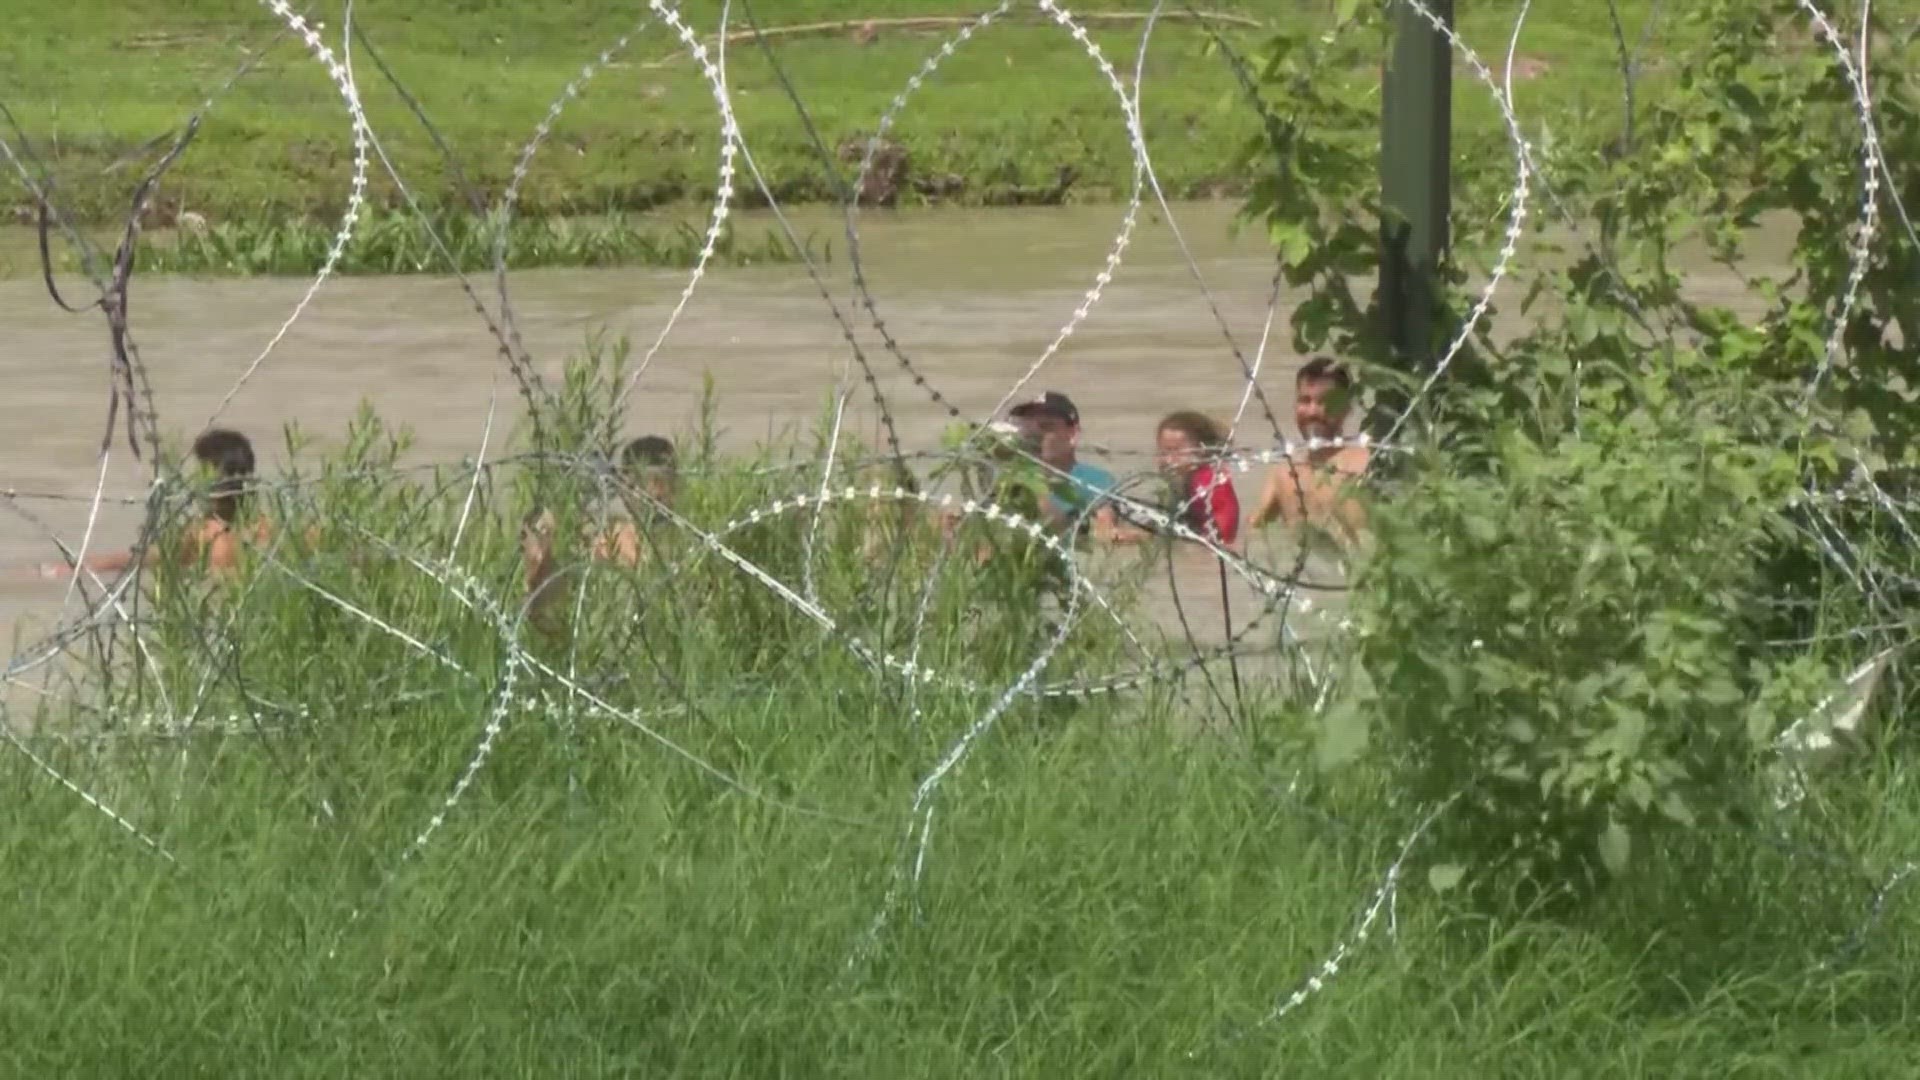 Troopers were apparently told to push migrant children into the river to go back to Mexico, according to a report from the Houston Chronicle.